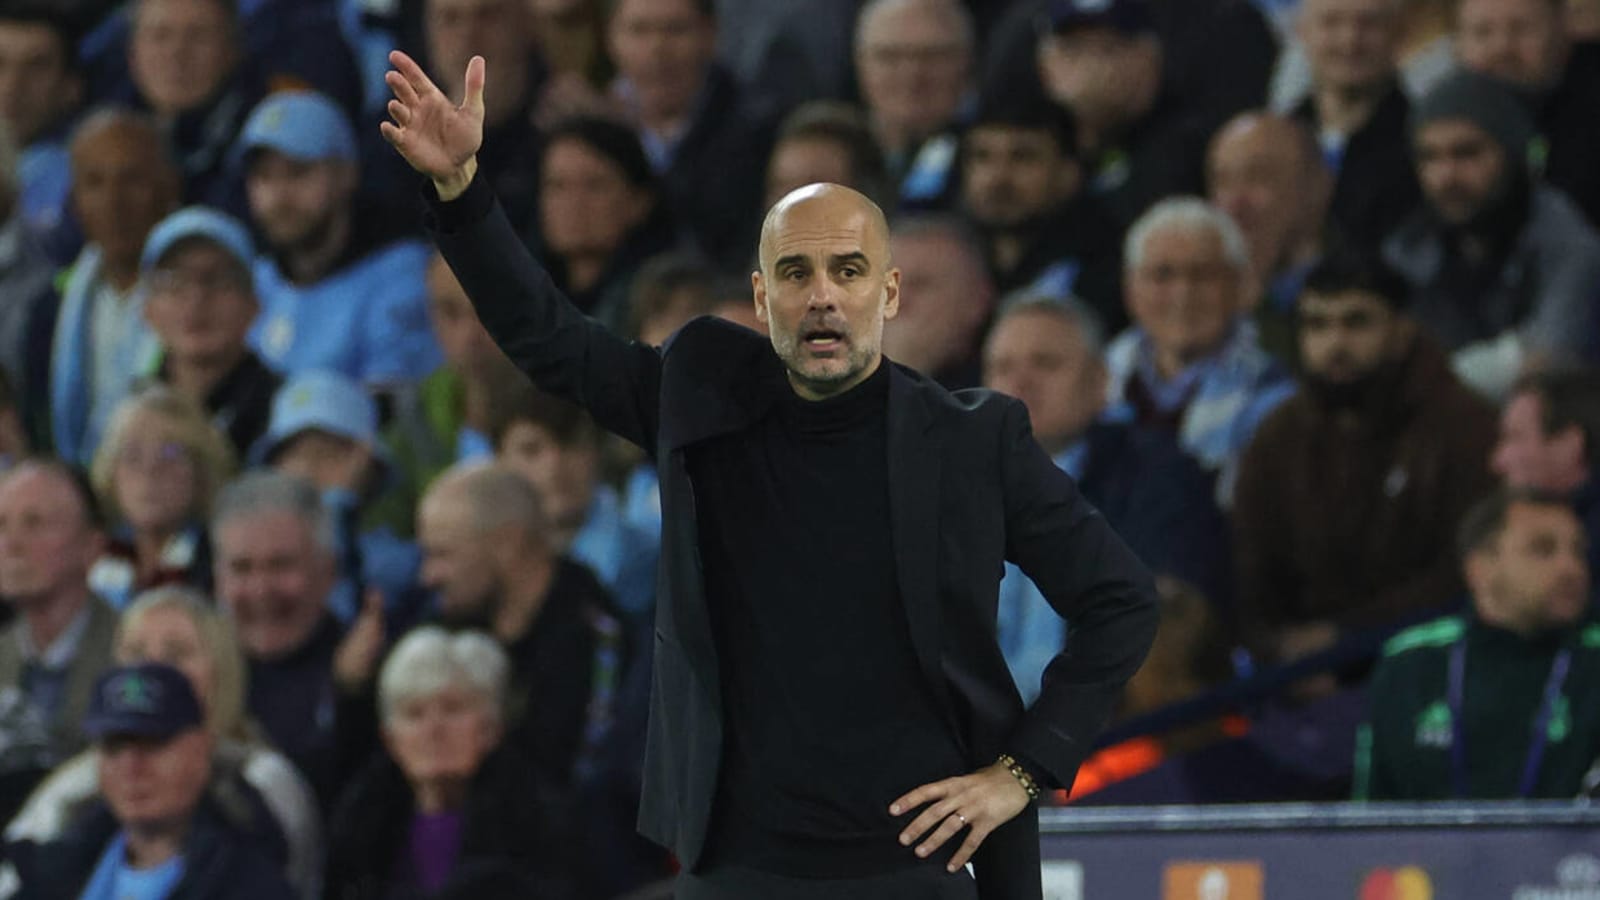 “I’m only part of it” – Pep Guardiola on how much of Manchester City’s success is down to him